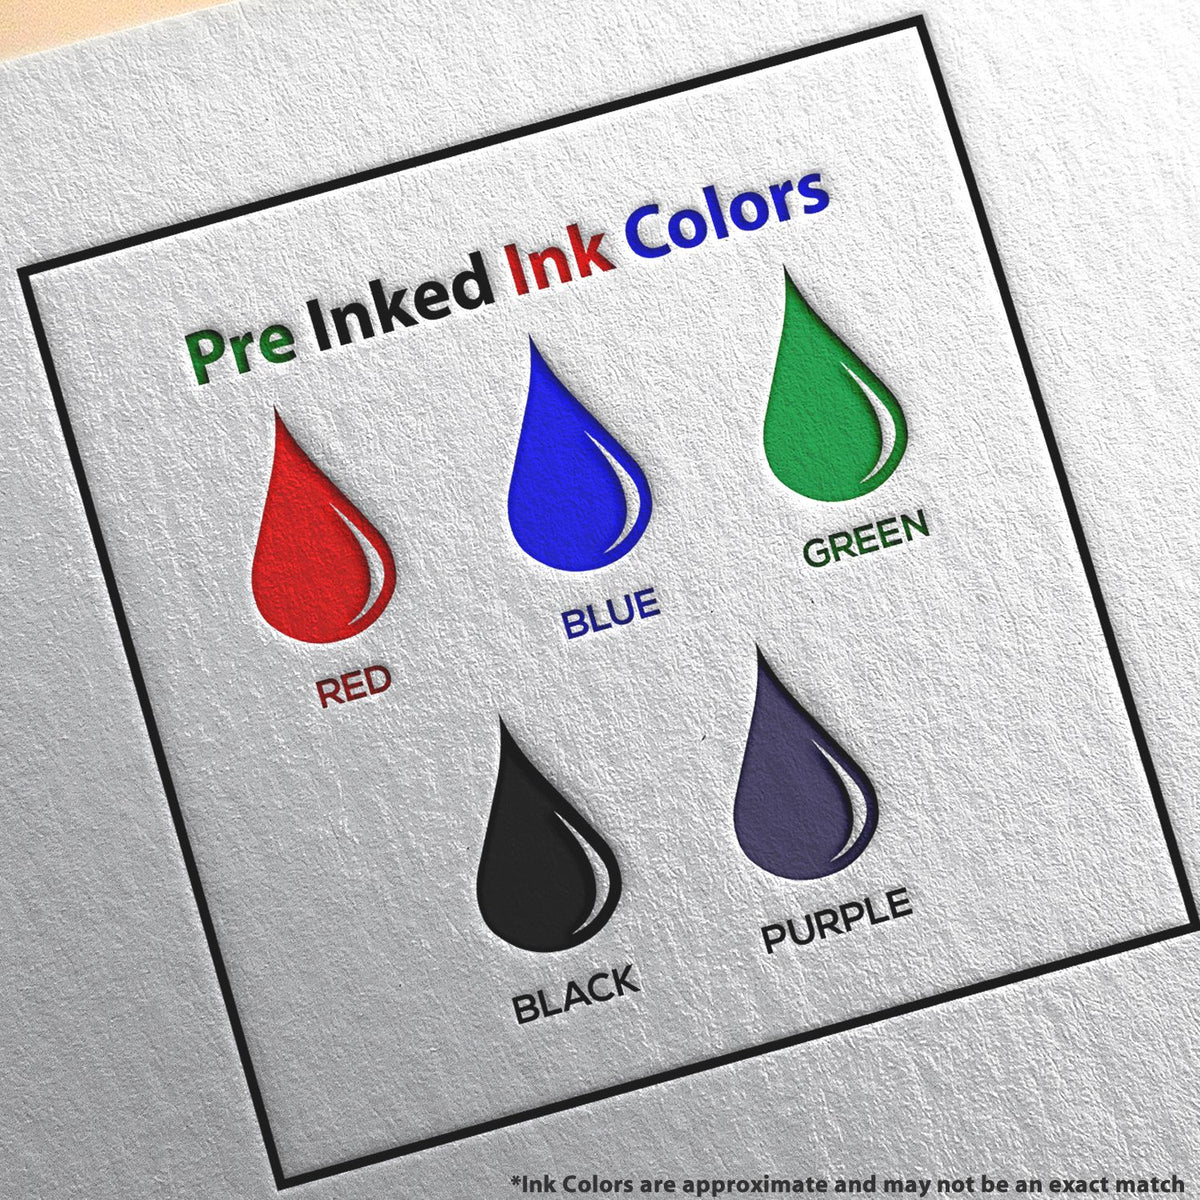 A picture showing the different ink colors or hues available for the PSI Virginia Notary Stamp product.